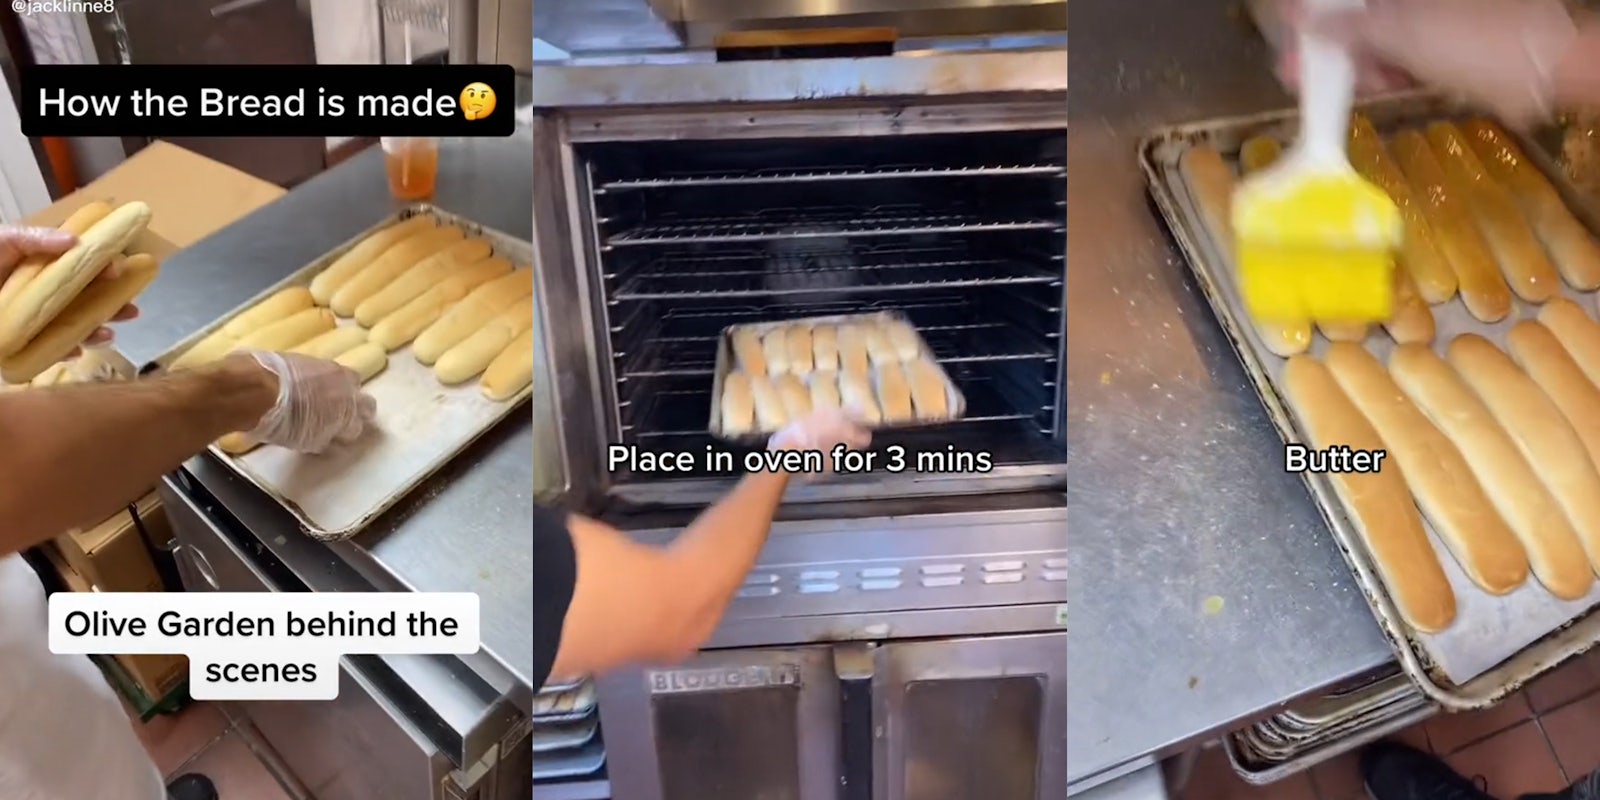 Person placing bread on tray with captions 'How the Bread is made' and 'Olive Garden behind the scenes' (l) hand placing tray into over with caption 'Place in oven for 3 mins' (c) hand painting butter on breadsticks with caption 'Butter' (r)